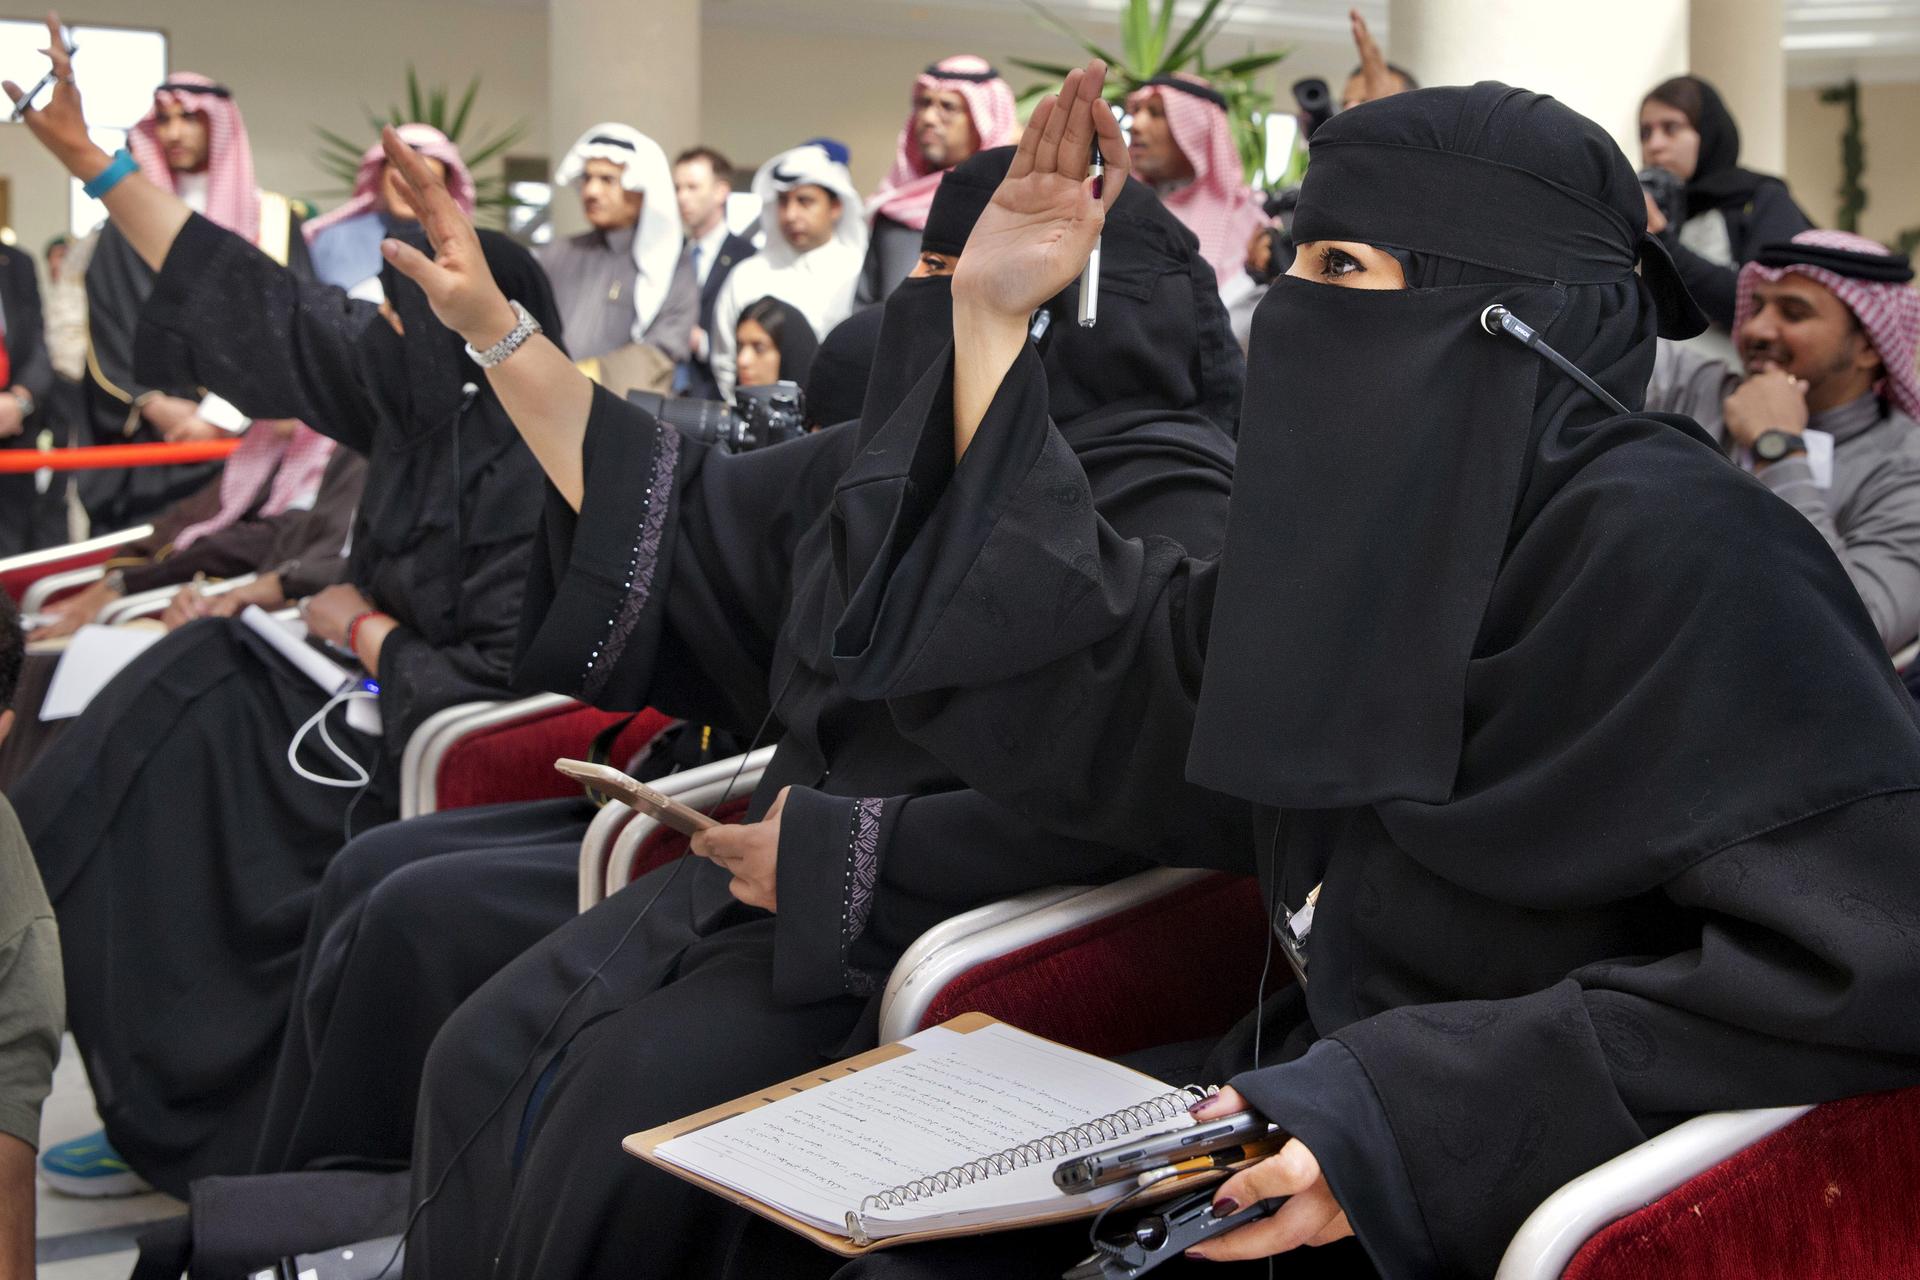 Saudi women journalists raise hands at press conference for US Secretary of State John Kerry